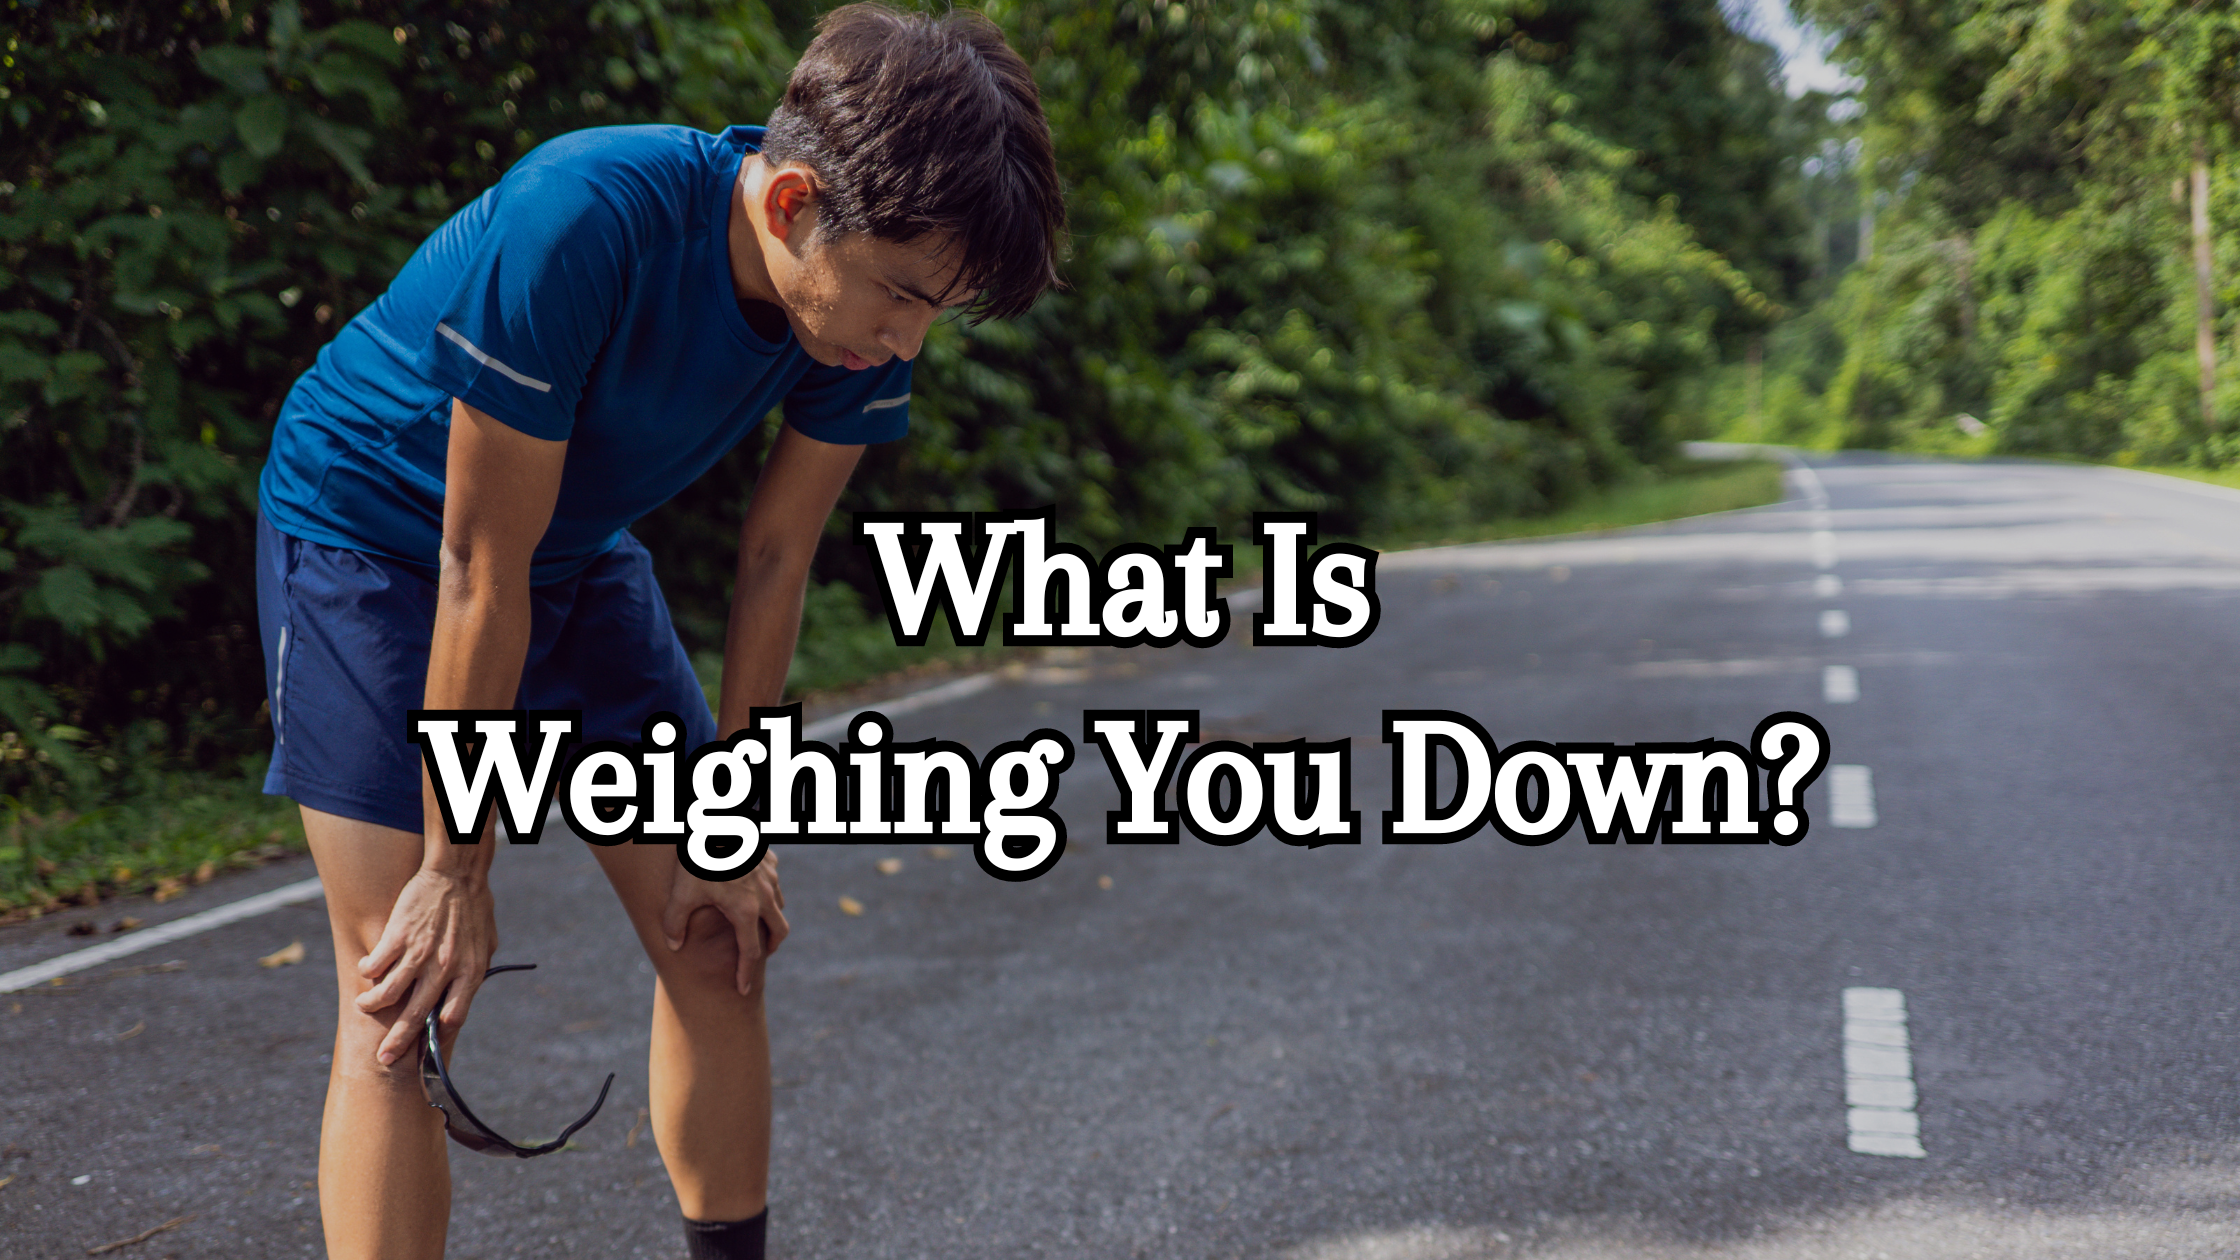 What is weighing you down